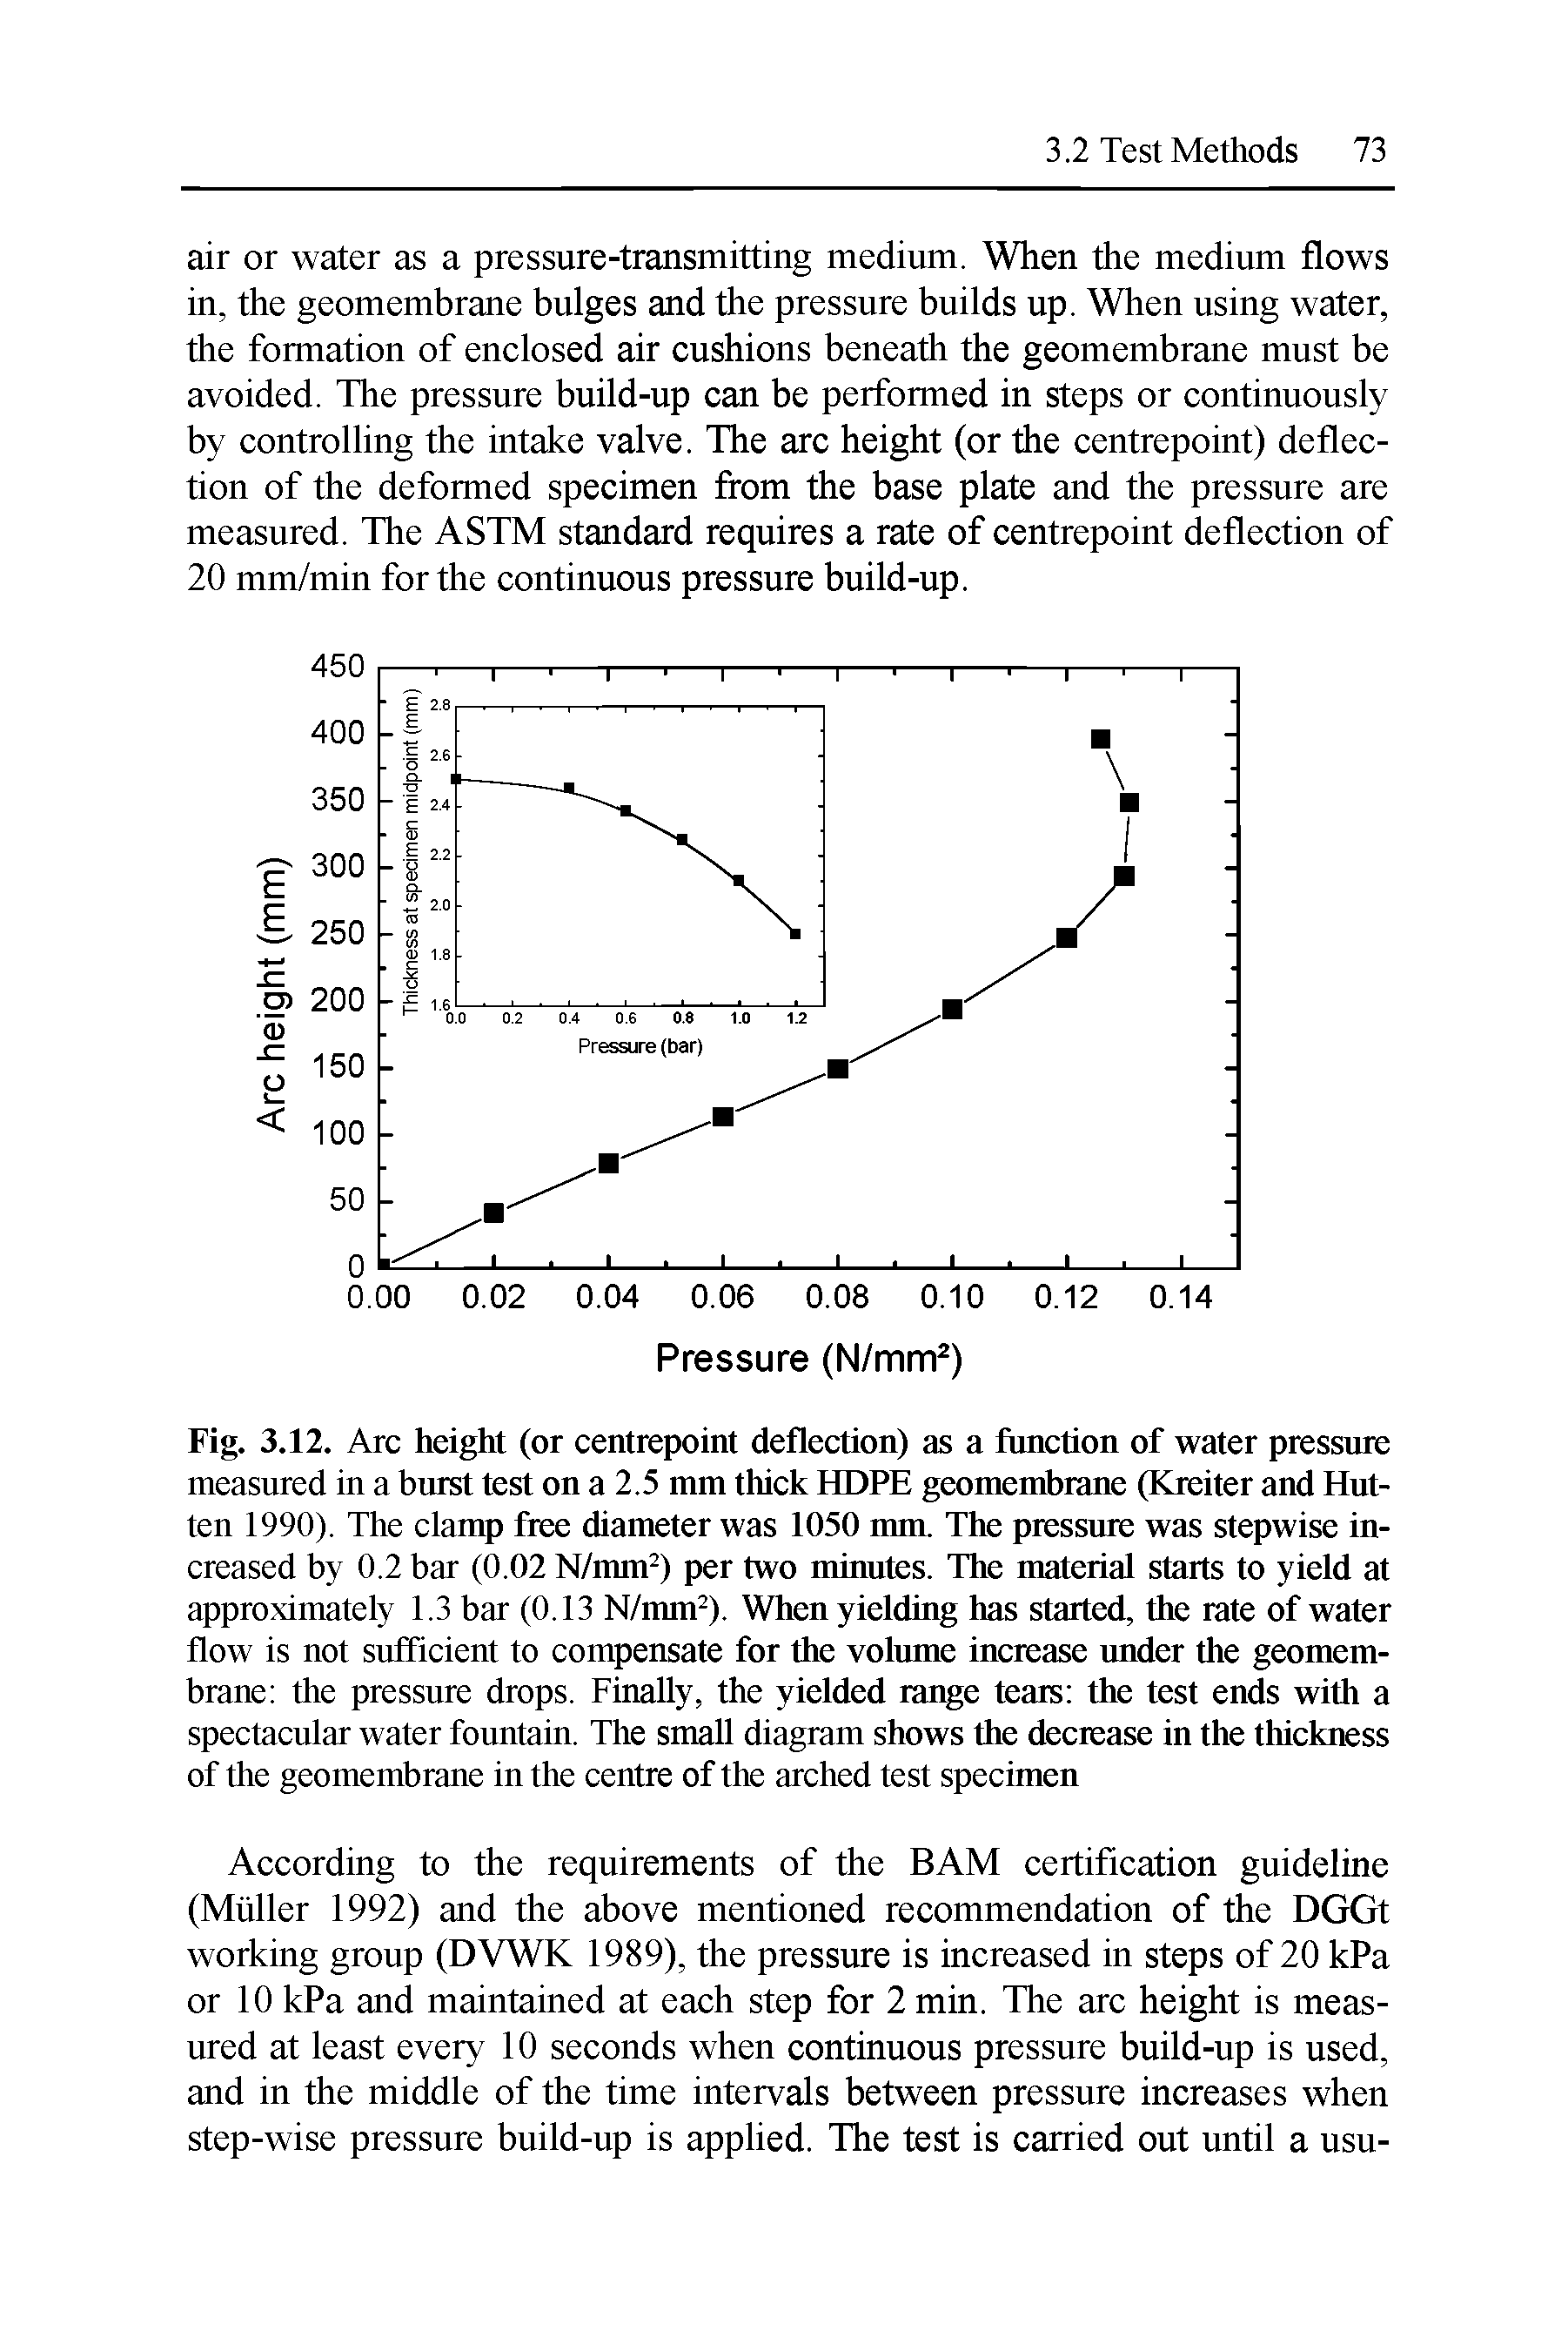 Fig. 3.12. Arc height (or centrepoint deflection) as a function of water pressure measured in a burst test on a 2.5 mm thick HDPE geomembrane (Kreiter and Hut-ten 1990). The clamp free diameter was 1050 mm. The pressure was stepwise increased by 0.2 bar (0.02 N/mm ) per two minutes. The material starts to yield at approximately 1.3 bar (0.13 N/mm ). When yielding has started, the rate of water flow is not sufficient to compensate for the volume increase under the geomembrane the pressure drops. Finally, the yielded range tears the test ends with a spectacular water fountain. The small diagram shows the decrease in the thickness of the geomembrane in the centre of the arched test specimen...